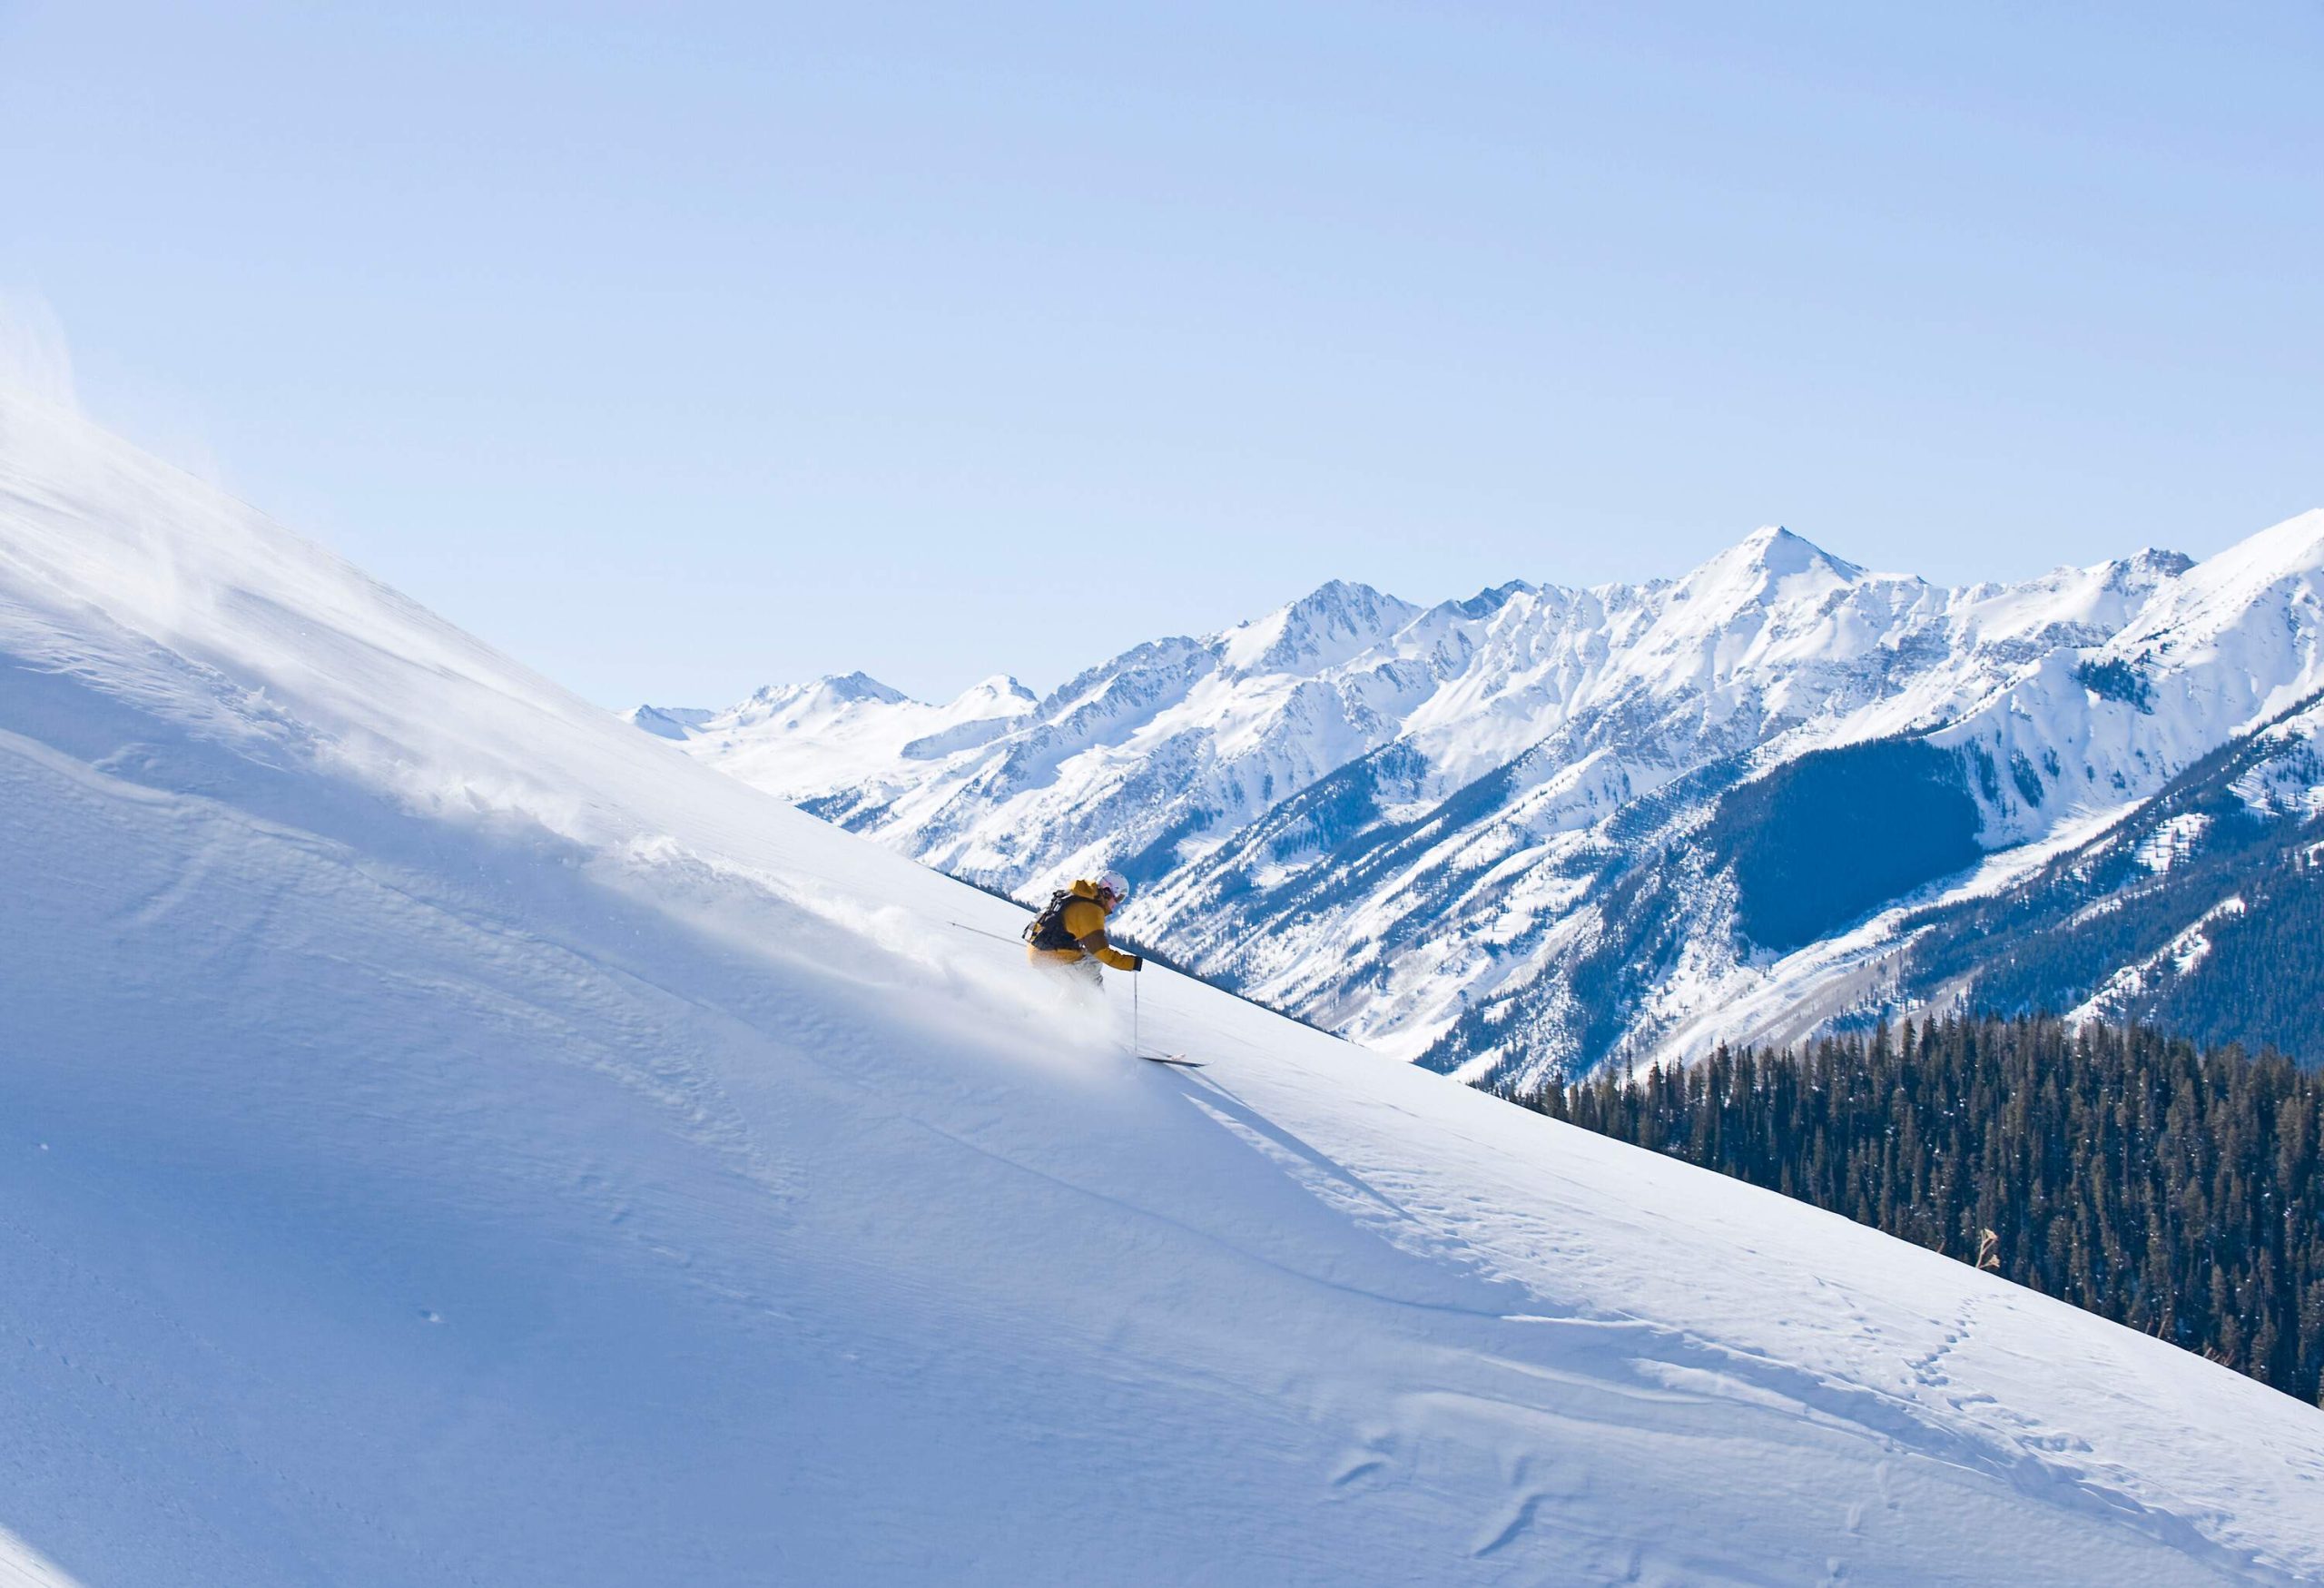 A skier sliding down a big mountain run with mountains and a forested valley in the distance.